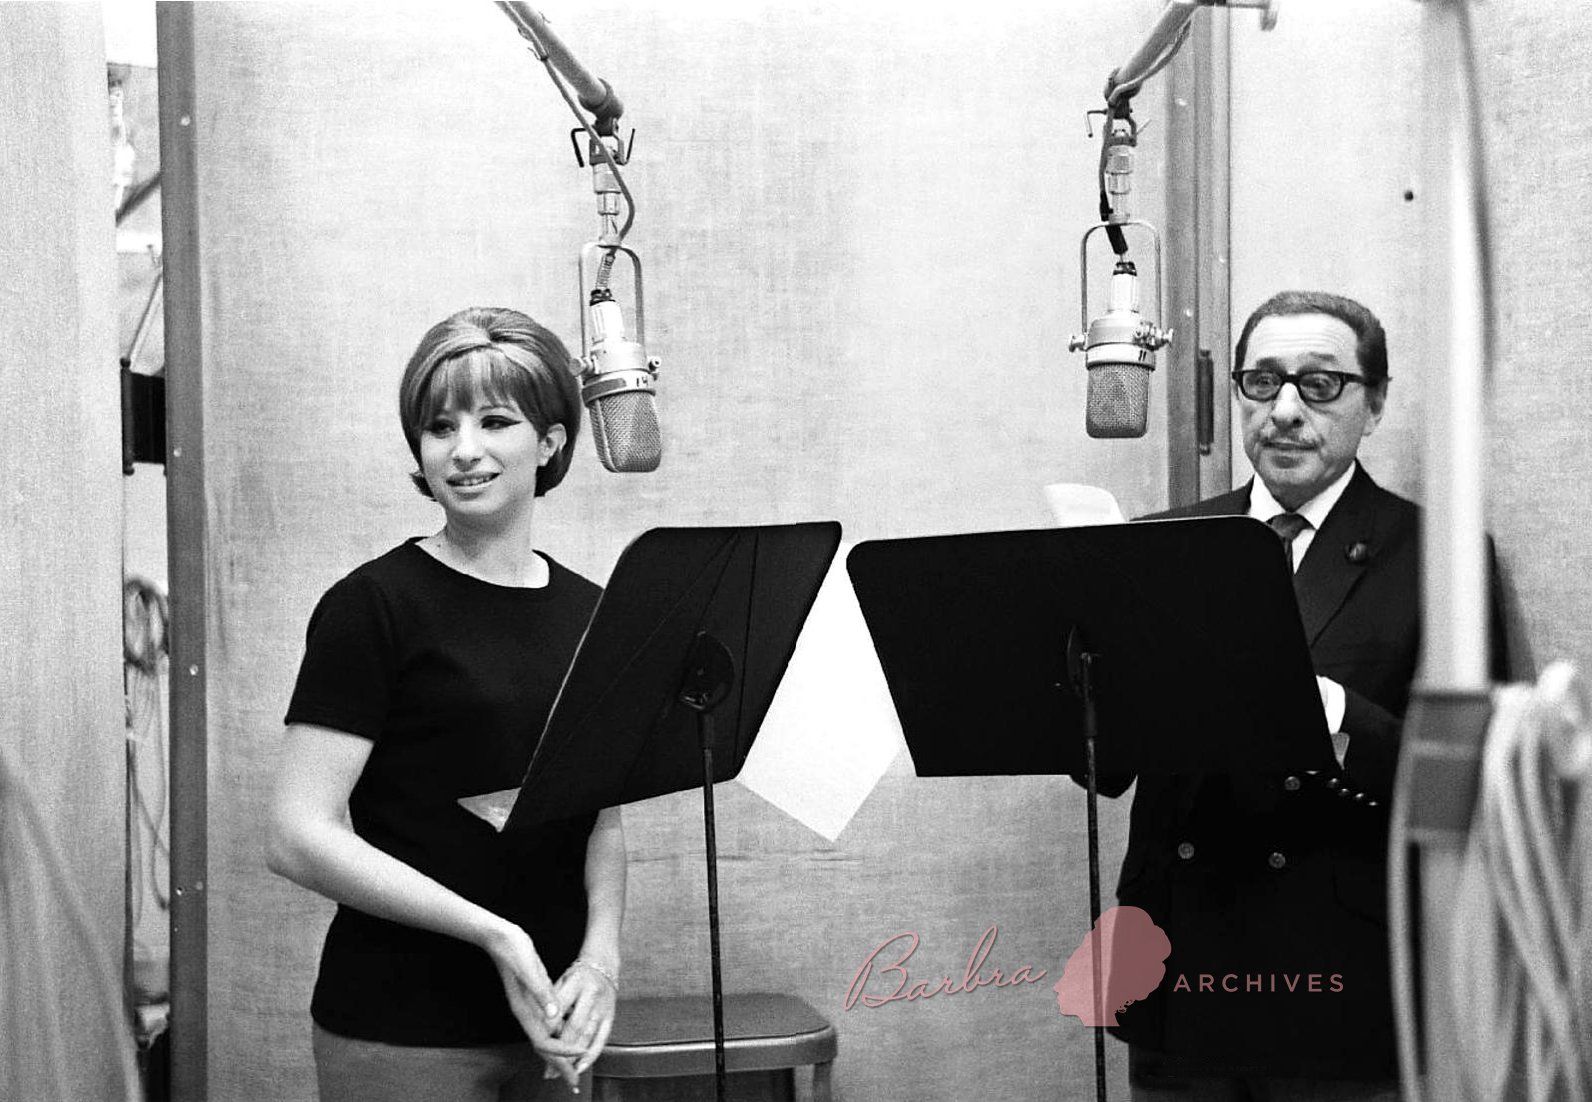 Streisand and Arlen at the microphones.  Photo by: Don Hunstein